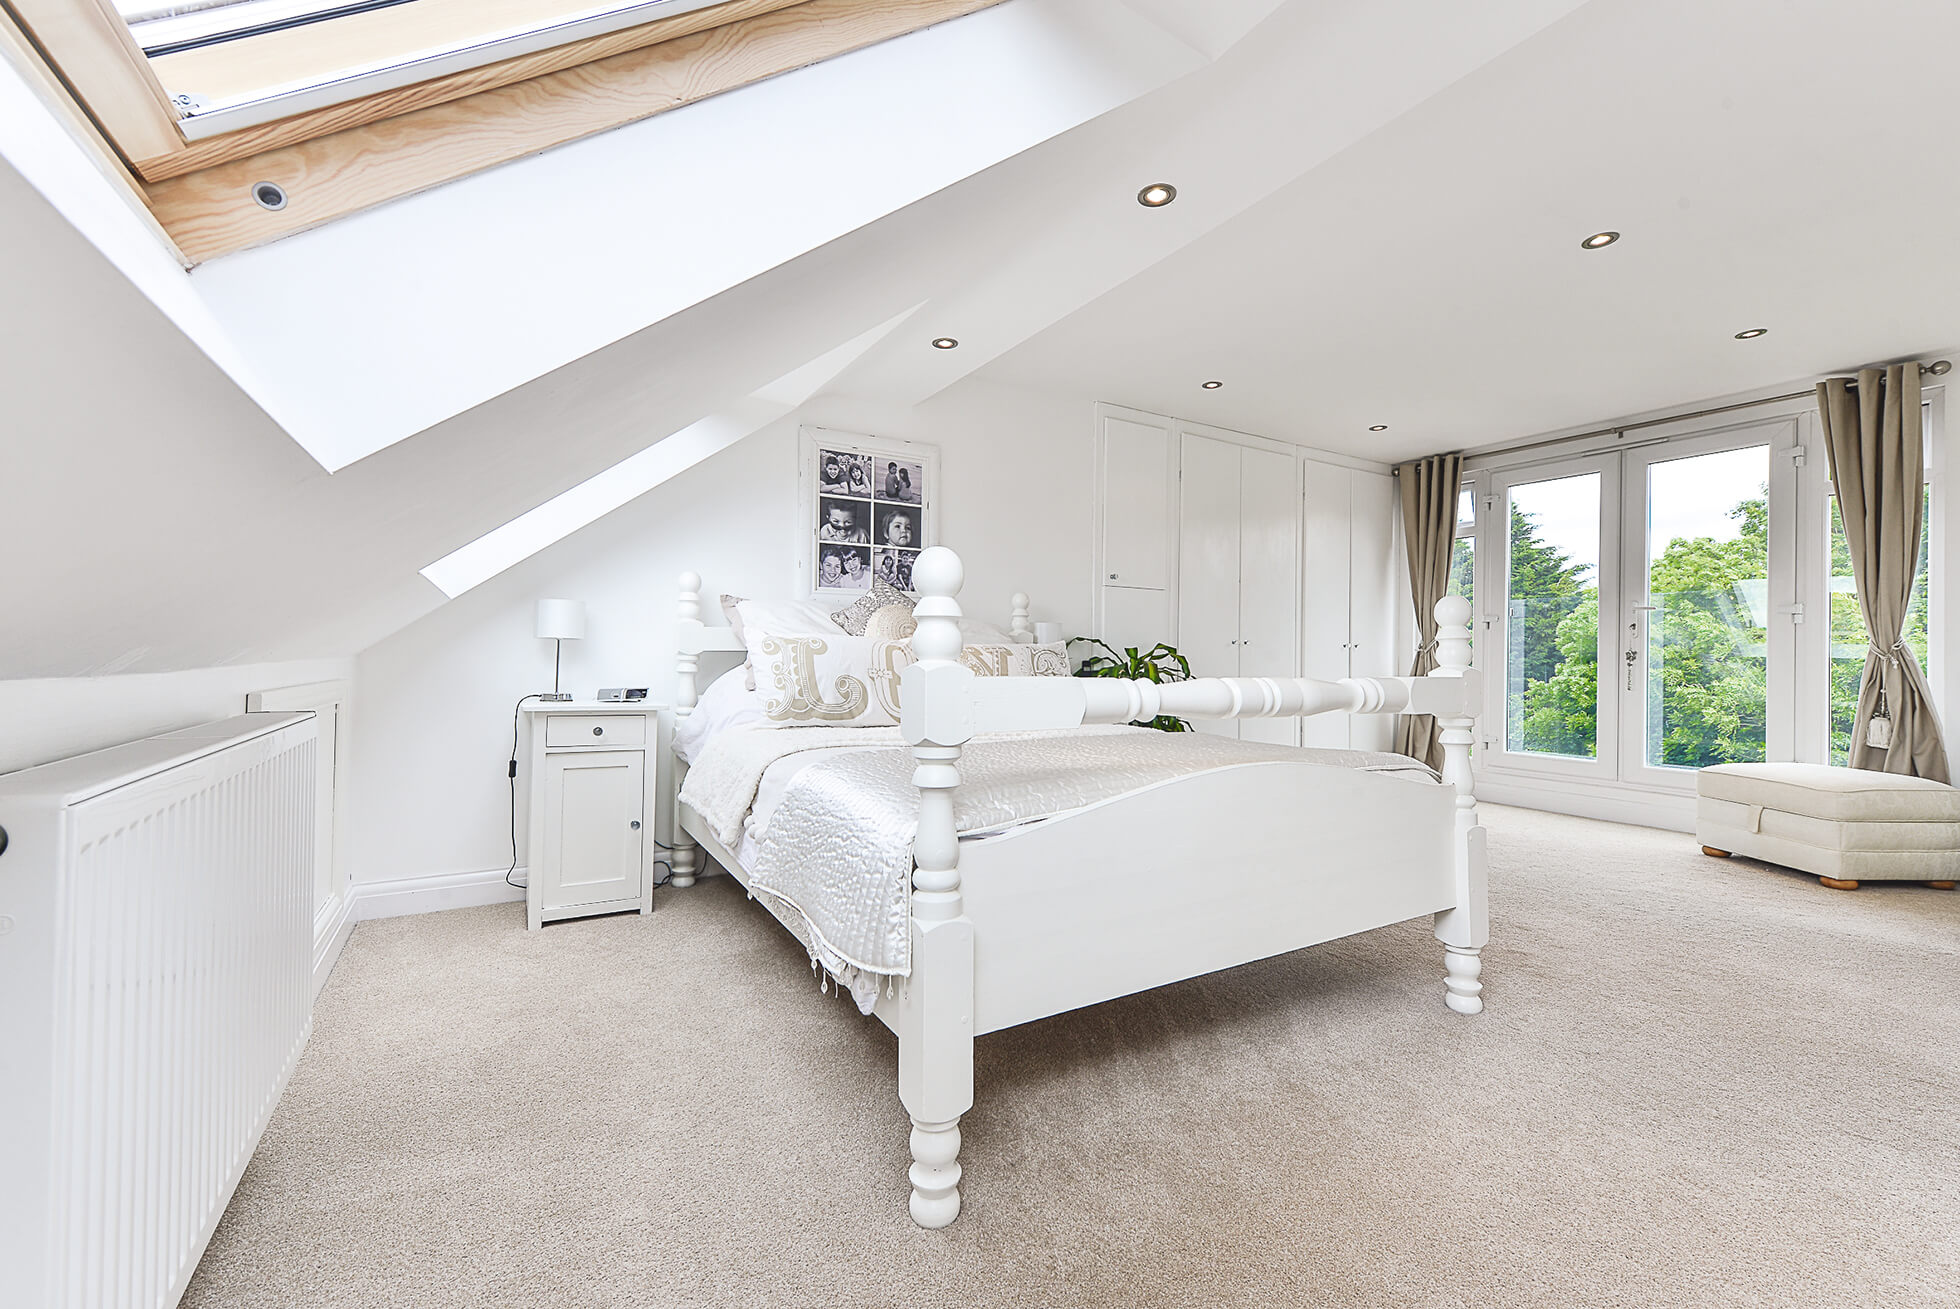 Do you have a question about converting your Loft in Wigginton? Here are the most popular questions asked by our clients.